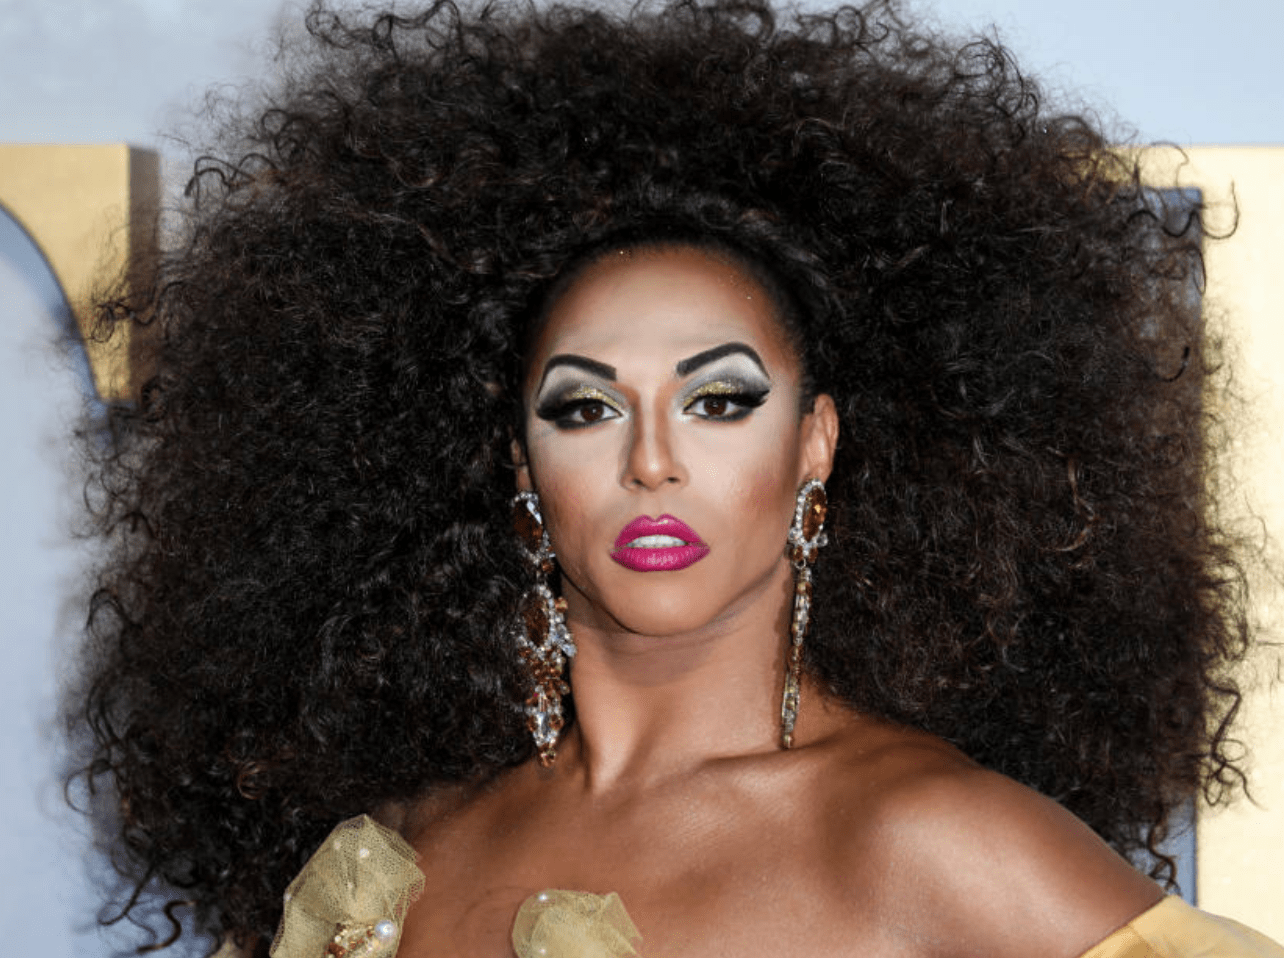 A new lawsuit alleges that Shangela, a celebrity from ‘Drag Race’, has been accused of rape.